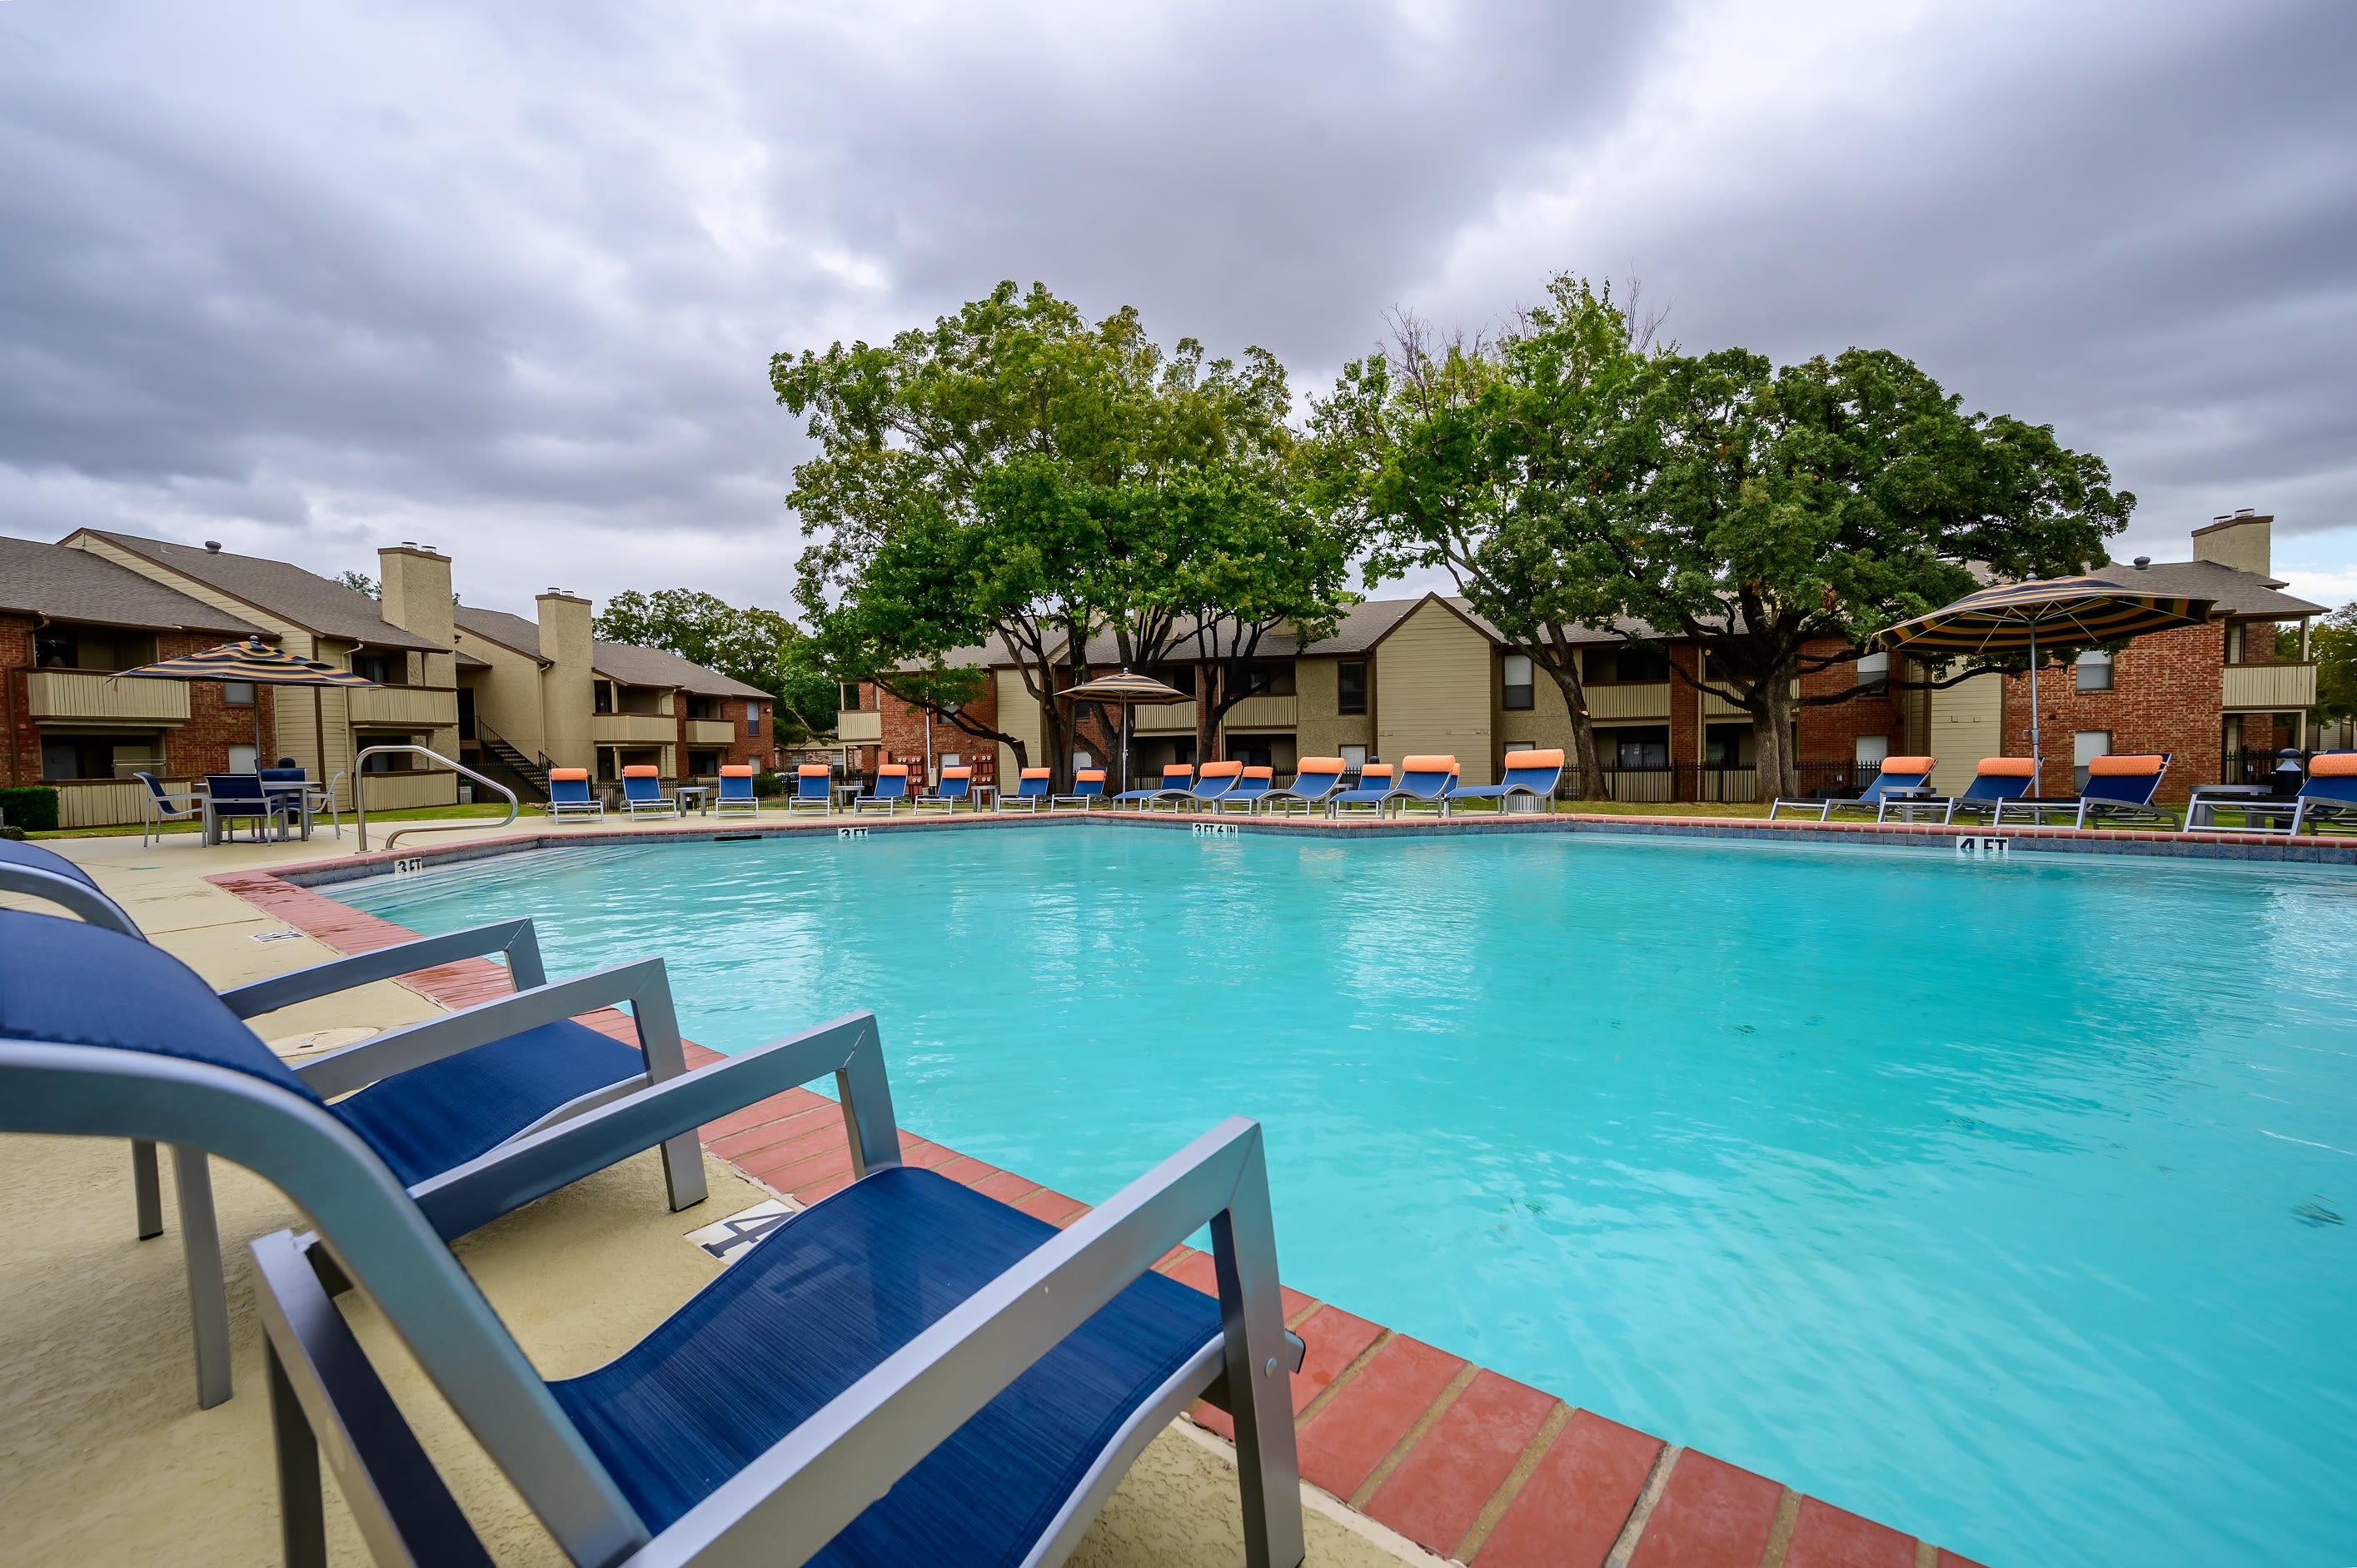 Lounge chairs poolside at The Logan in Bedford, Texas